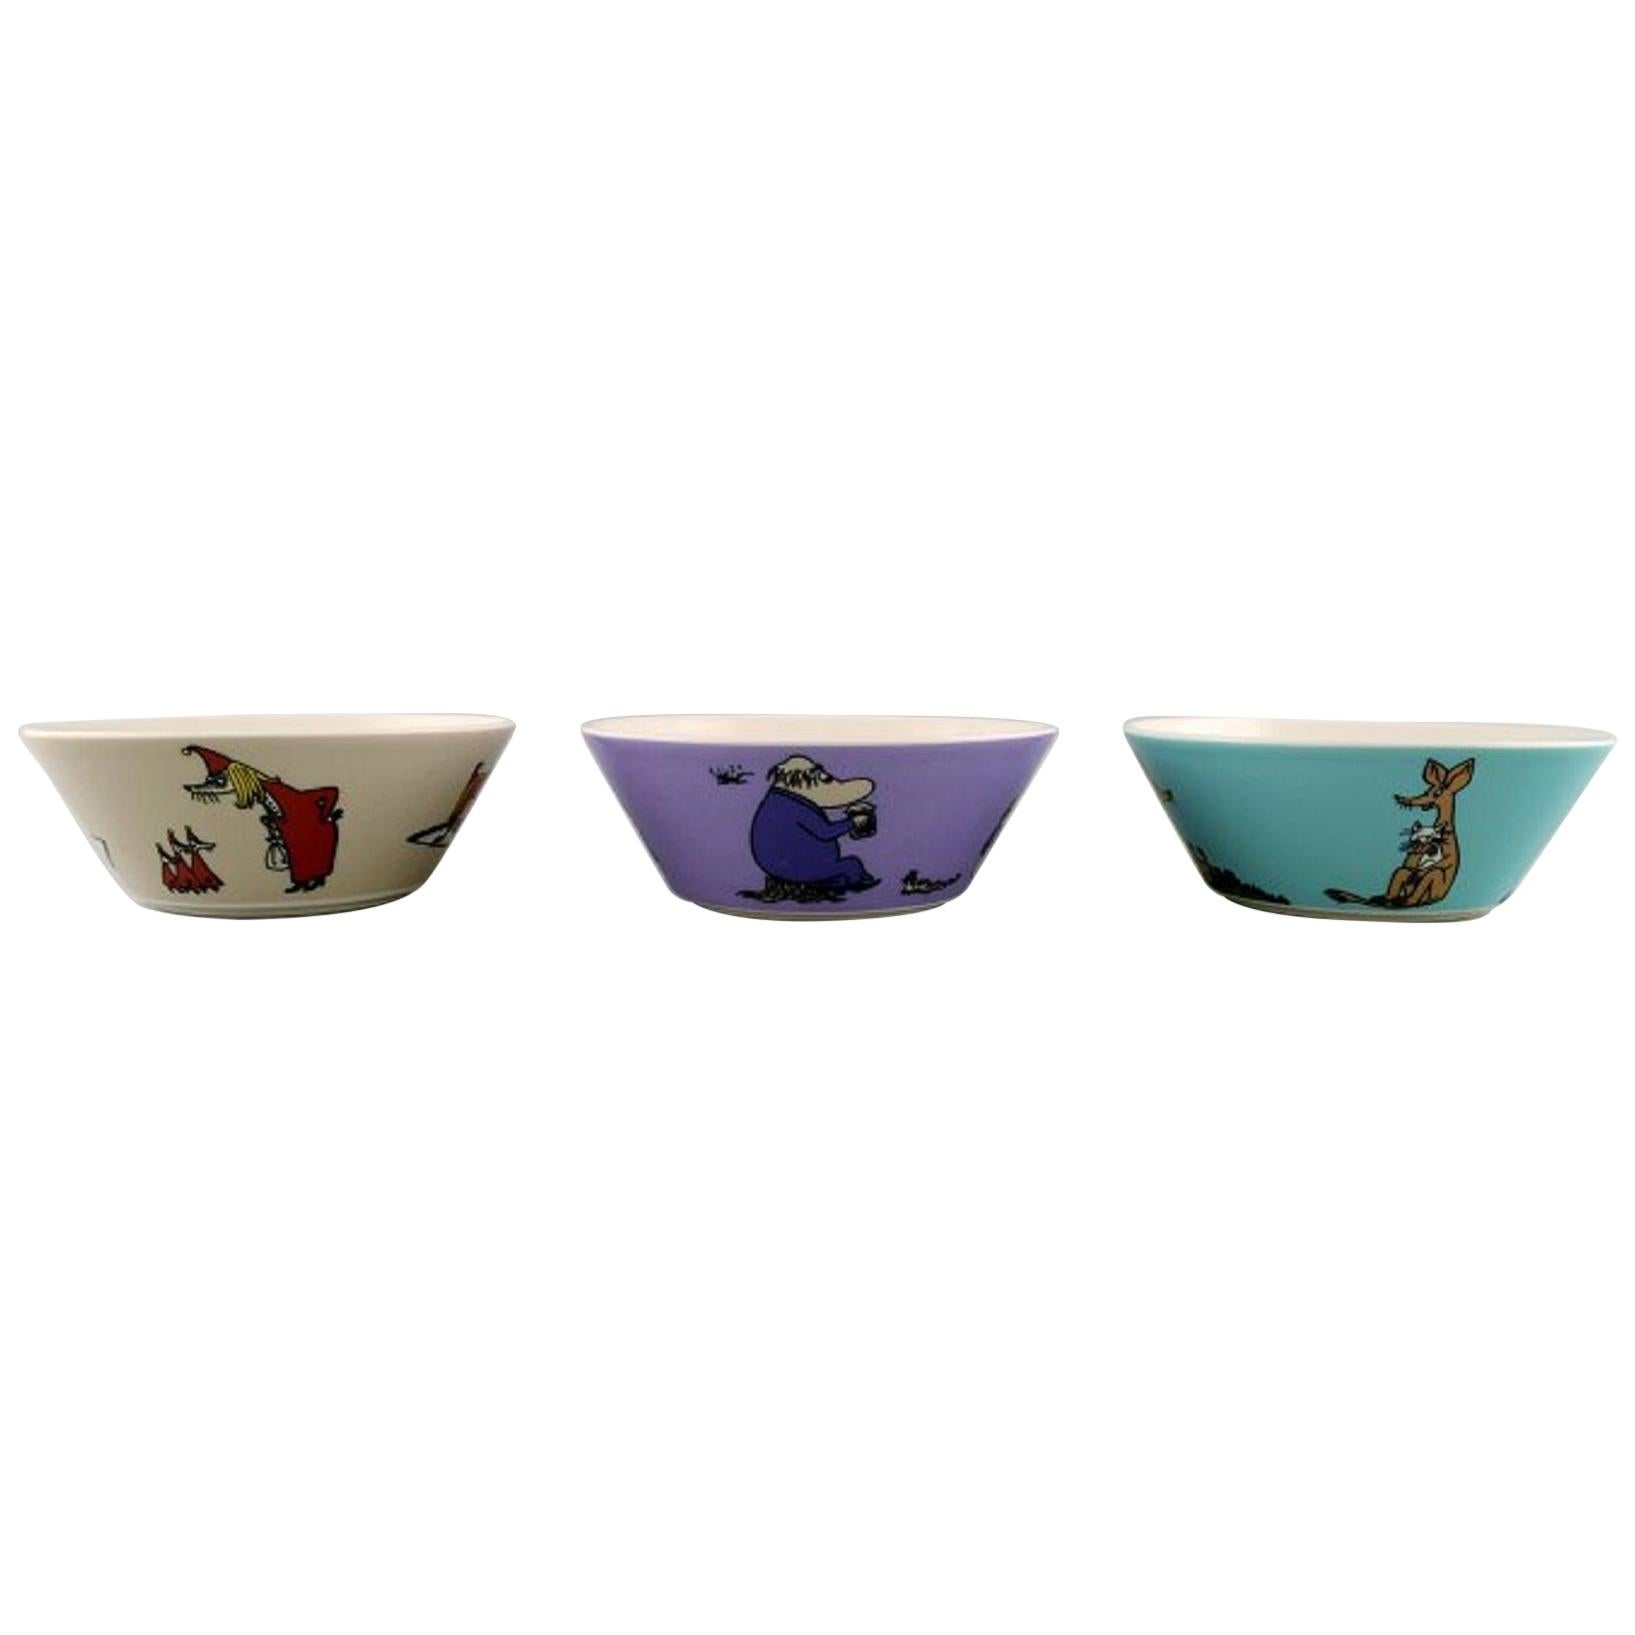 Arabia, Finland, Three Porcelain Bowls with Motifs from "Moomin” For Sale